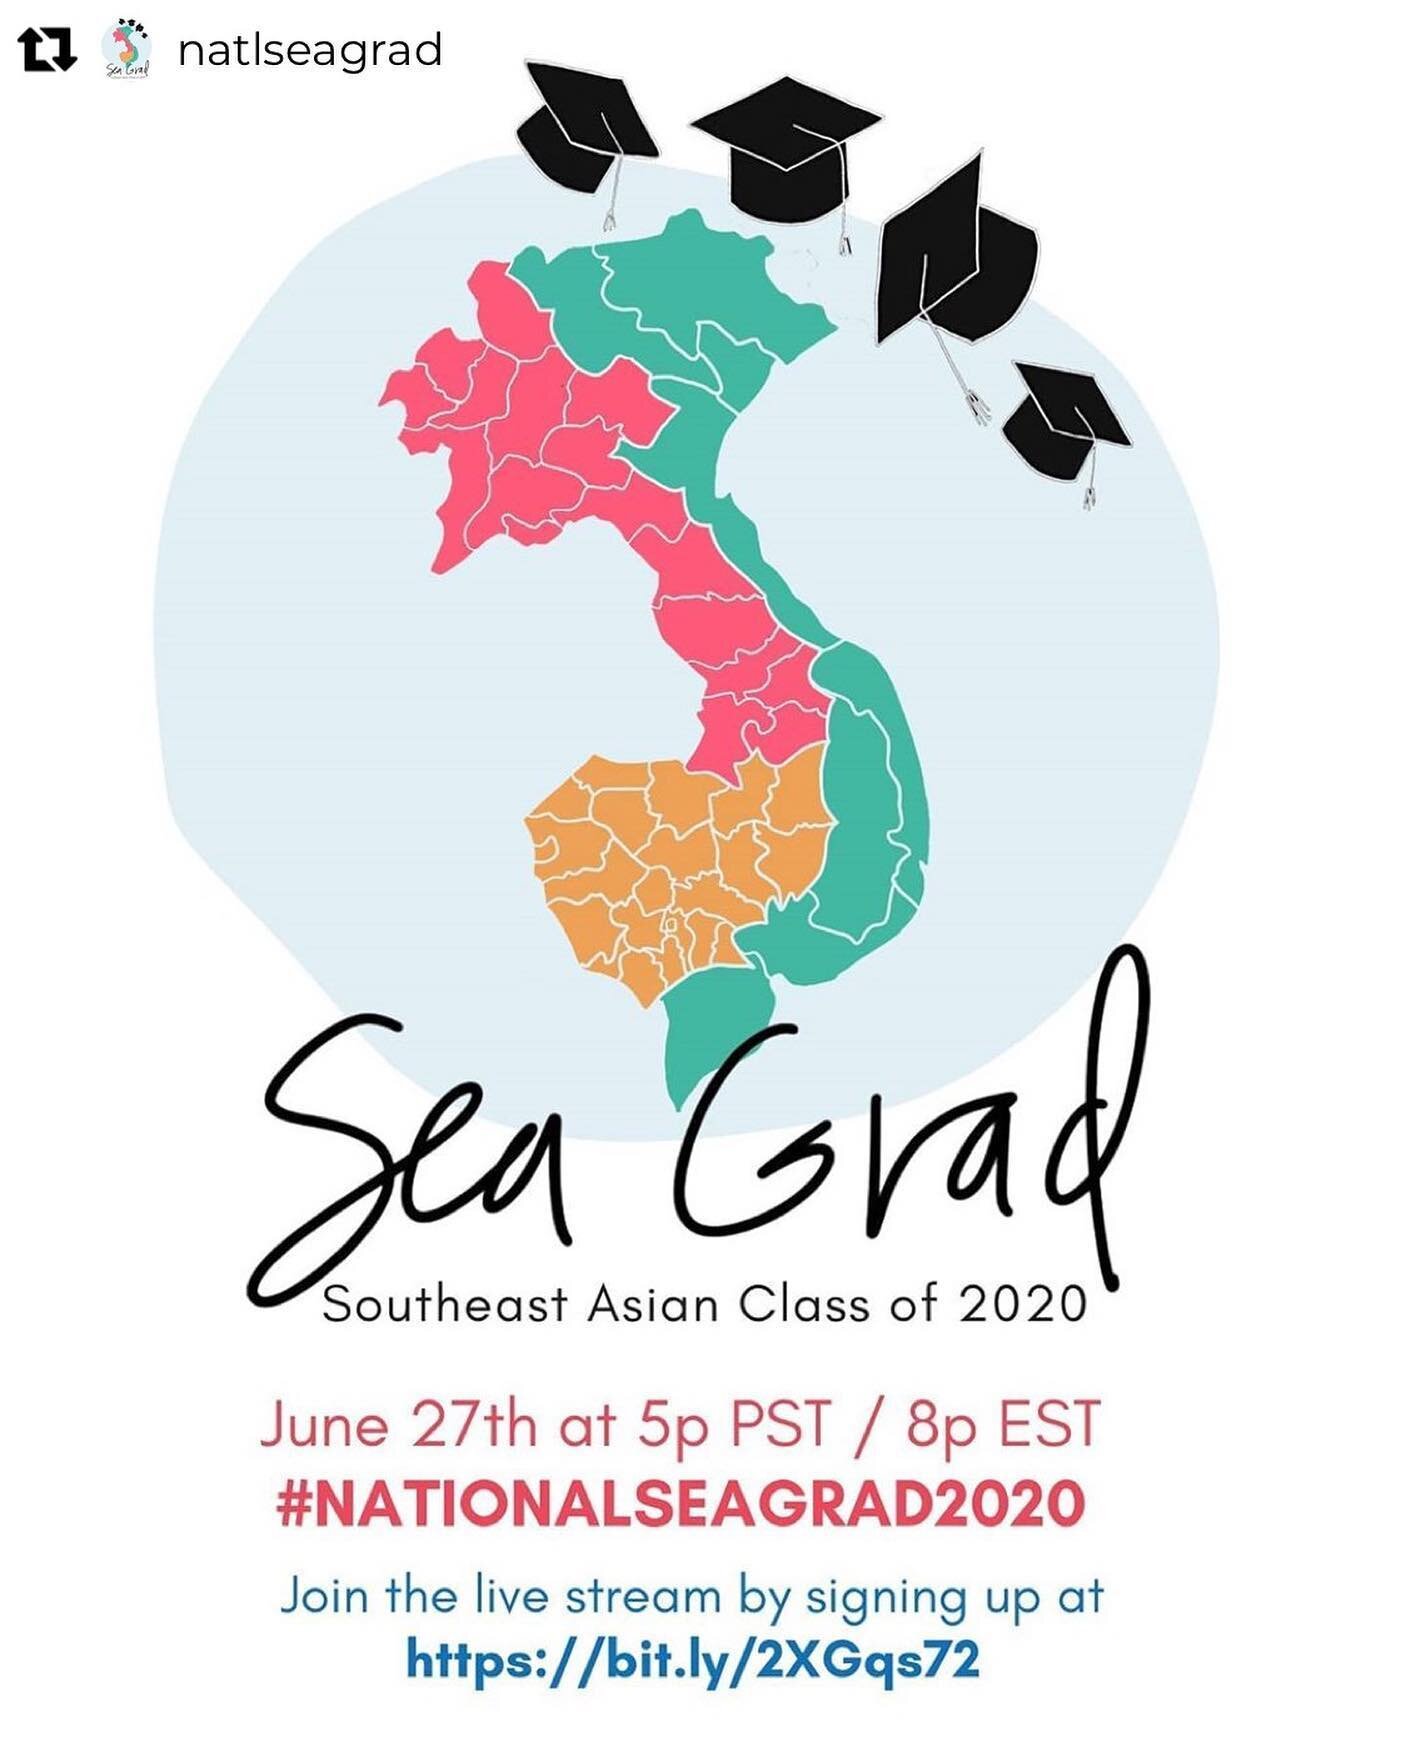 Repost from @natlseagrad
&bull;
Graduations across the country have been disrupted by the COVID-19 pandemic. We know that Southeast Asian graduations are an opportunity for us to come together to reflect and celebrate as a community. So a grassroots 